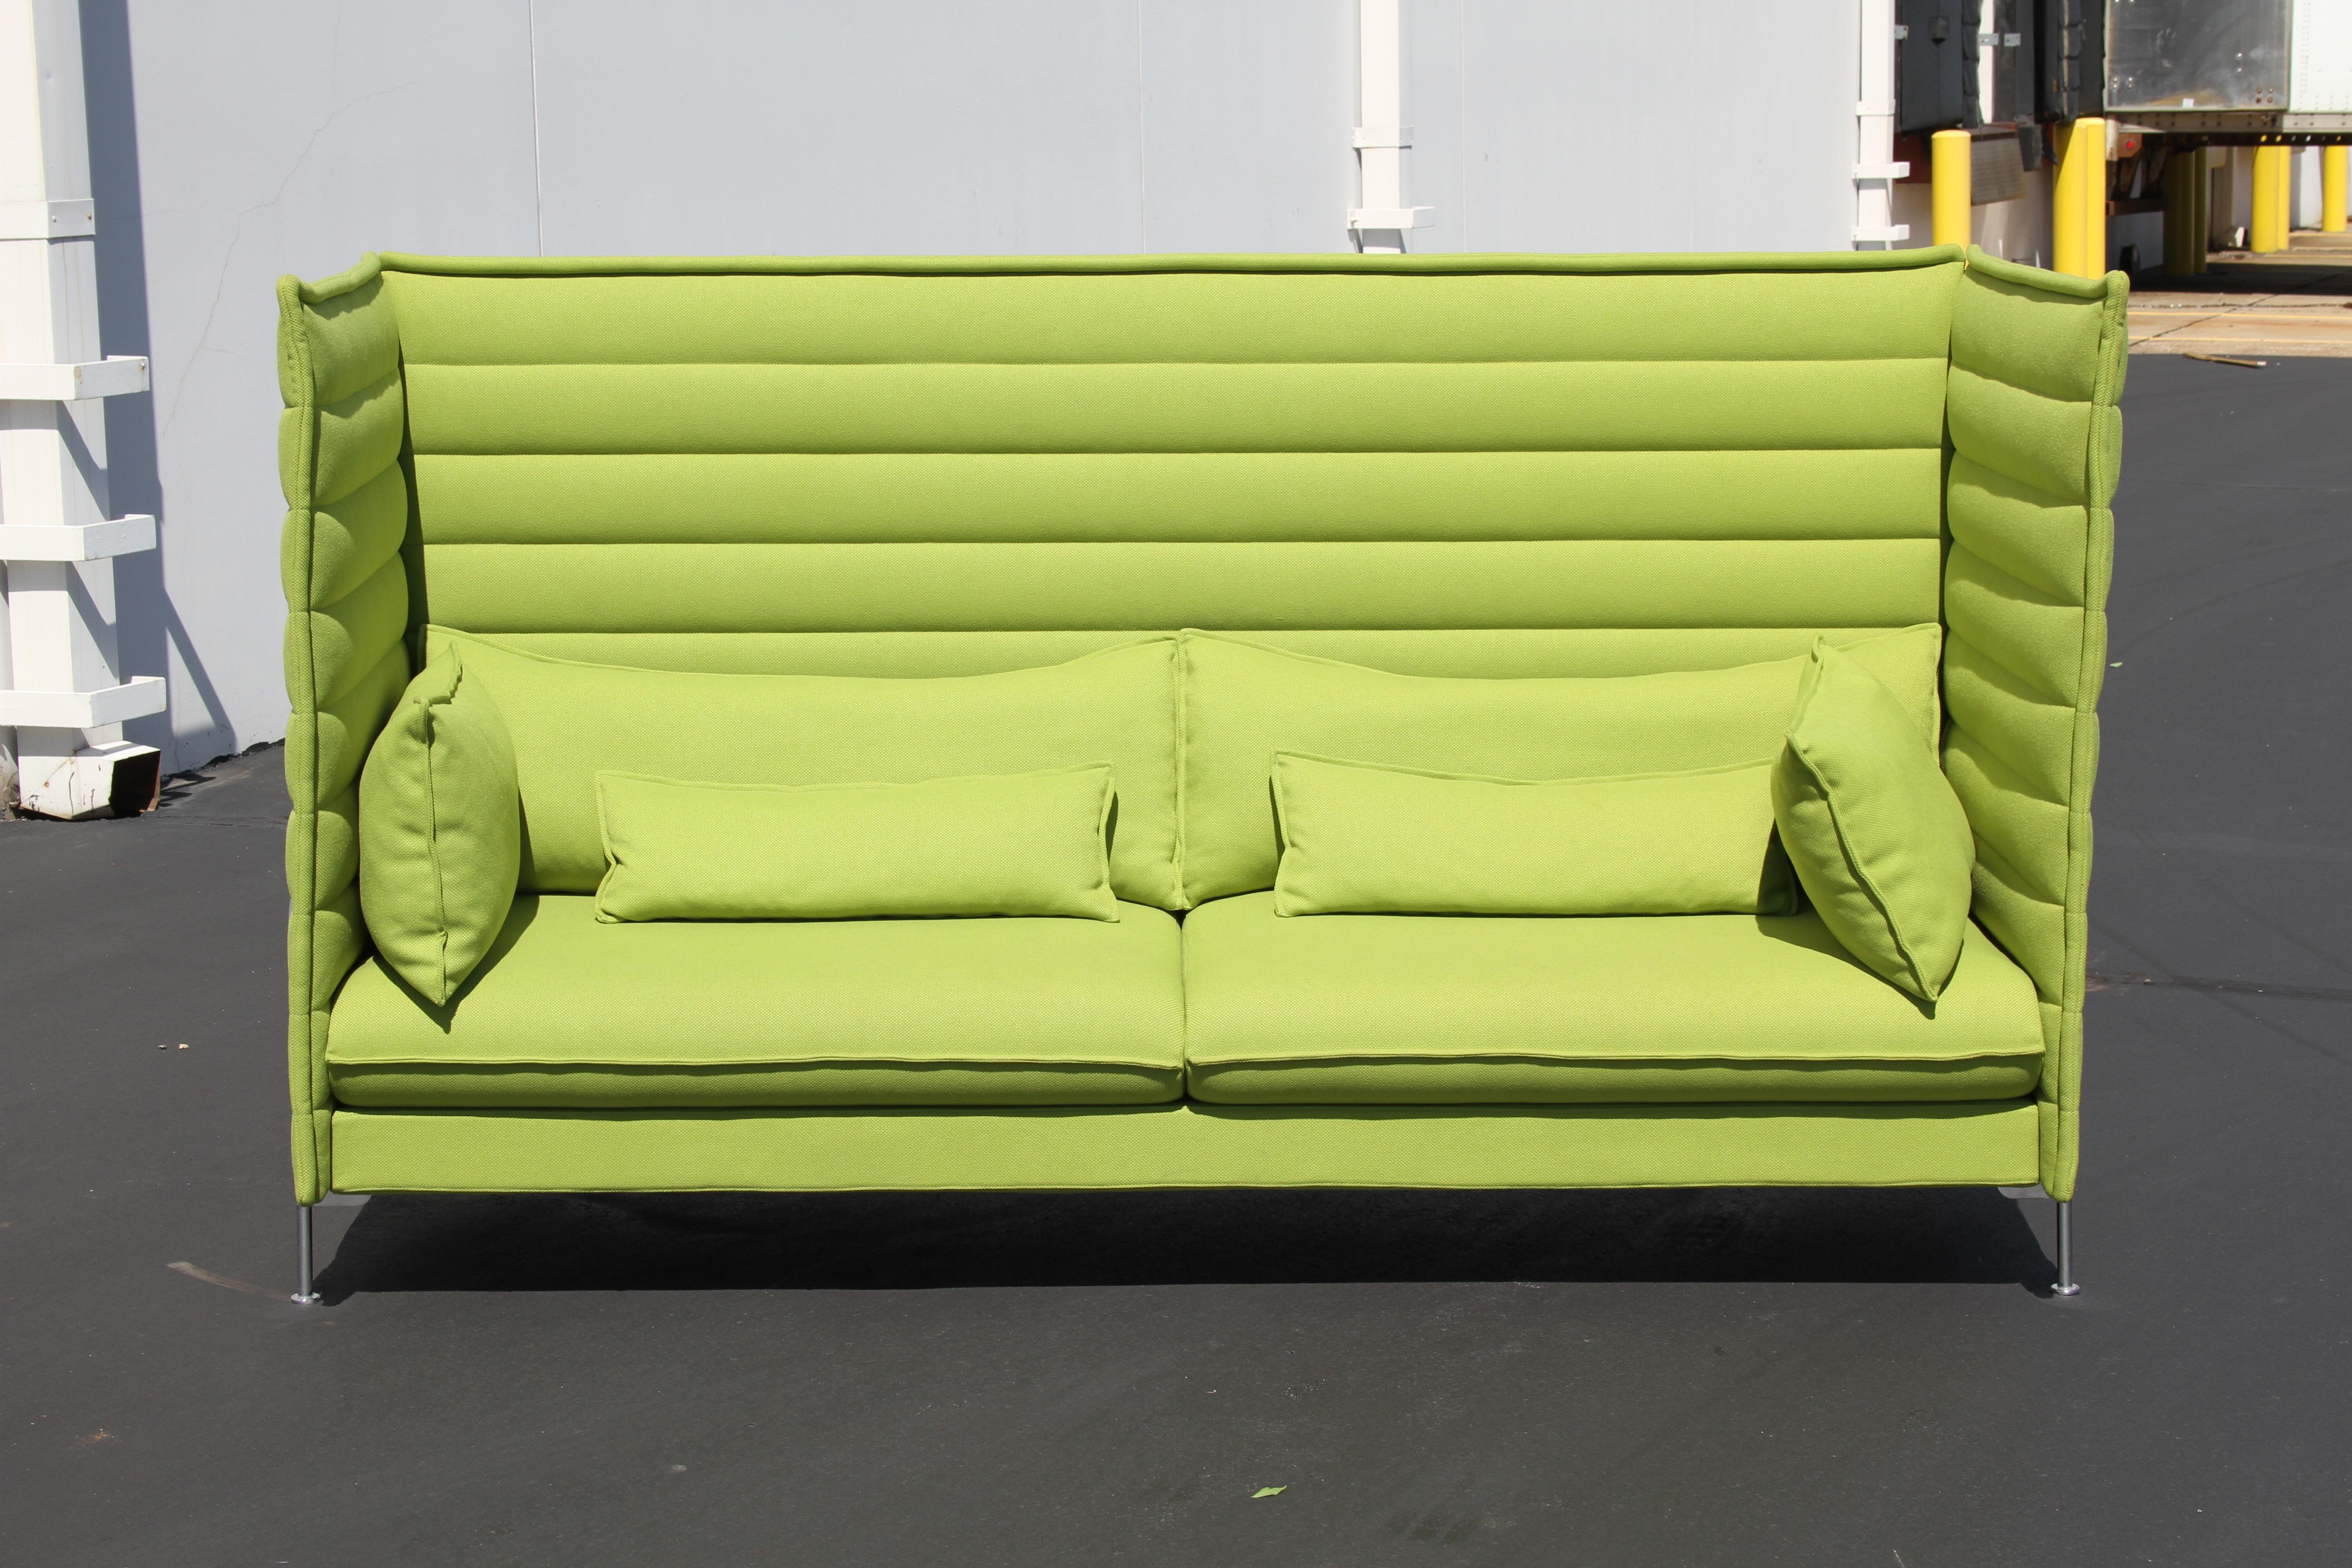 Listed are a great pair of Ronan & Erwan Bouroullec for Vitra Alcove Xtra High sofas, sold separately. When faced together, they can create a private space. 

In very nice condition, Fabric is polyester Trevira CS: 100%, with few minor stains that